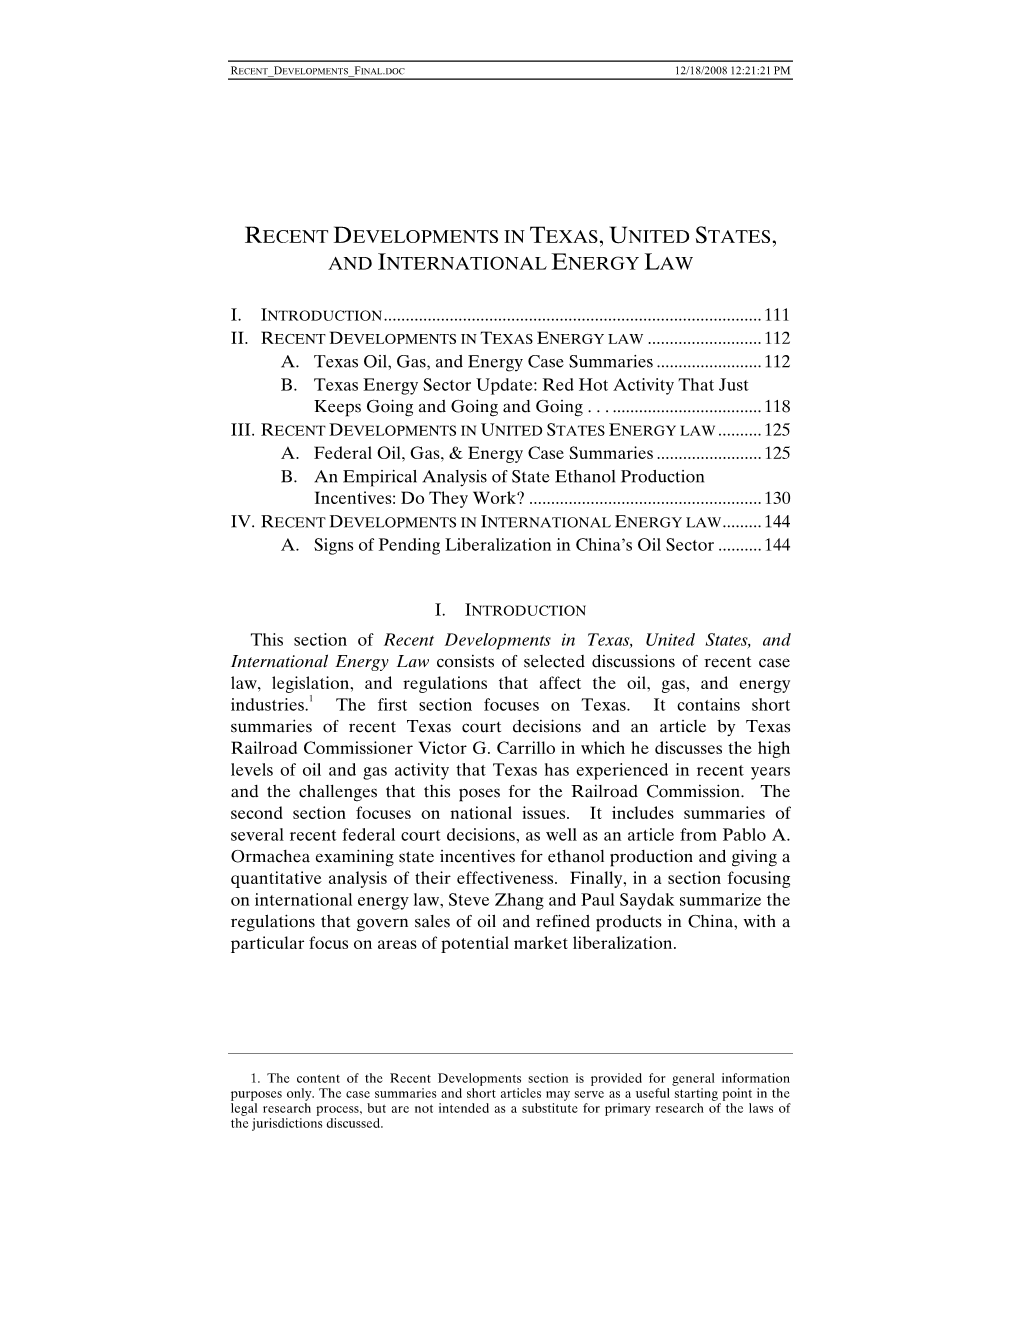 Recent Developments in Texas, United States, and International Energy Law